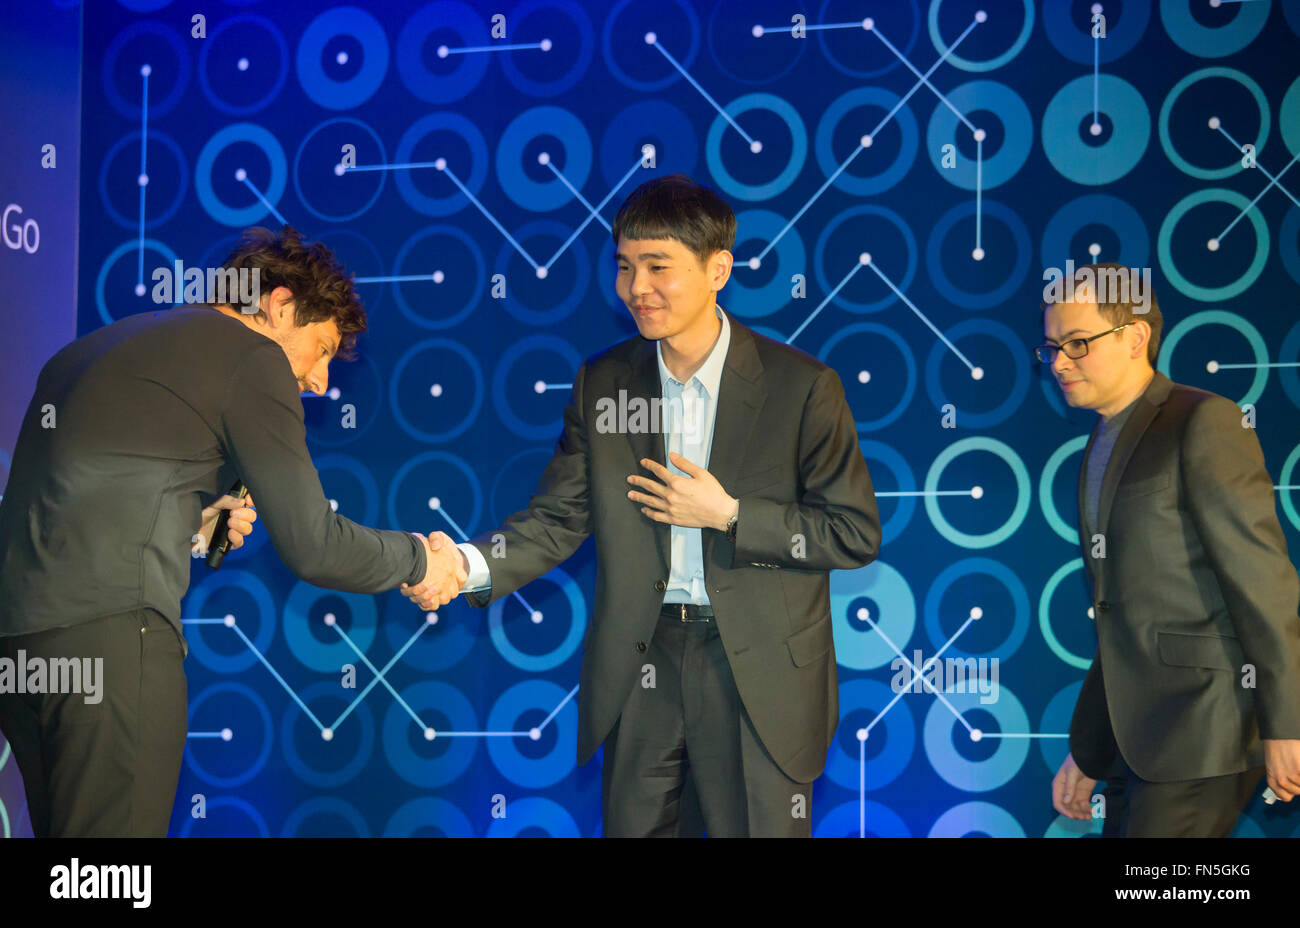 Lee Se-dol, Demis Hassabis and Sergey Brin, Mar 12, 2016 : South Korean Go master Lee Se-dol (C), Demis Hassabis (R), CEO of the AlphaGo developer Google DeepMind and Sergey Brin, Google co-founder attend a press conference after the third match of the Google DeepMind Challenge Match in Seoul, South Korea. Lee beat on Sunday AlphaGo, the artificial intelligence (AI) program made by Google's DeepMind, for the first time at the fourth match during the special human-versus-computer Go tournament and the five-round Go tournament is now 3-1 as of March 14, 2016, local media reported. (Photo by Lee Stock Photo